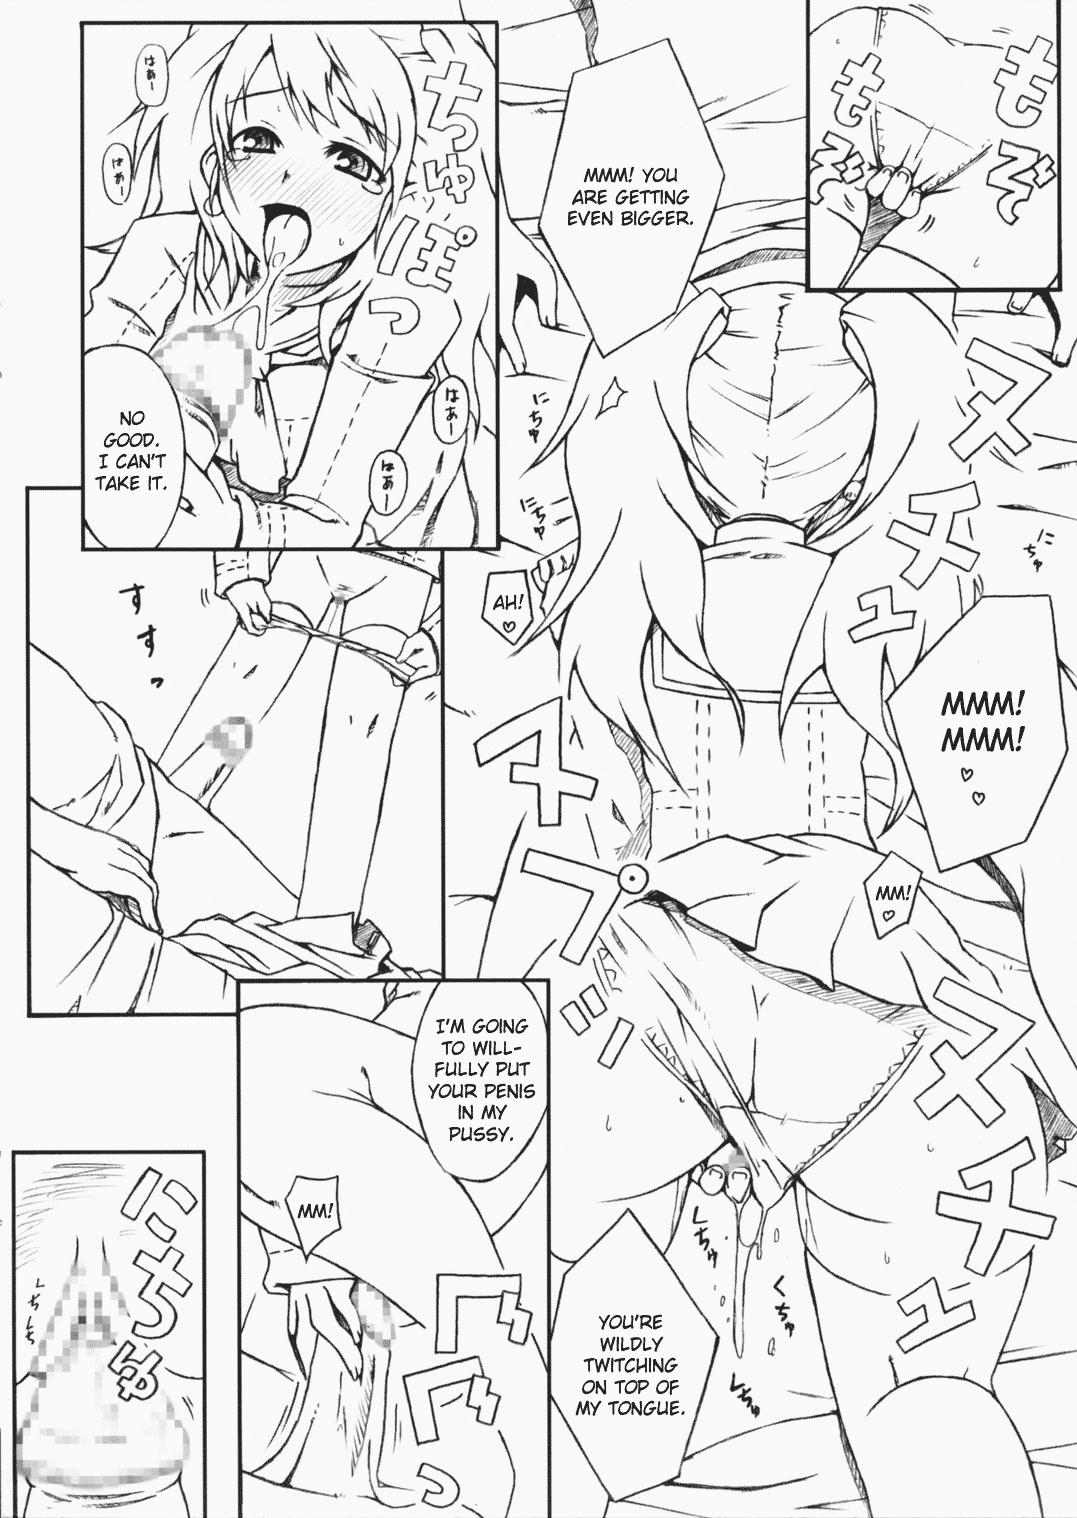 Blond DUO - Persona 4 Eurobabe - Page 5